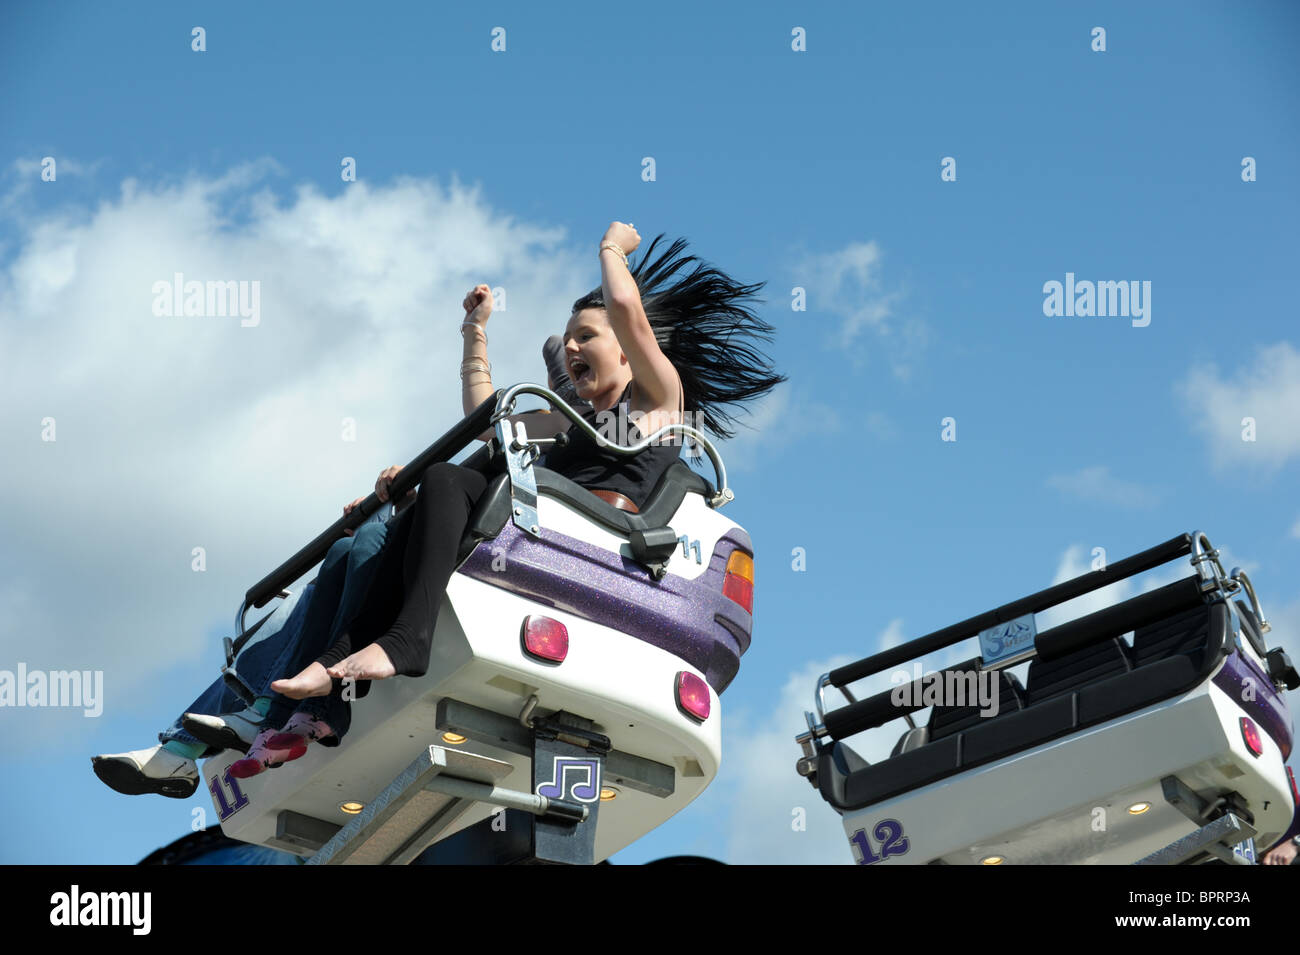 Girls laughing and screaming on a fairground ride with arms in the air and black hair flying up against a blue sky Stock Photo